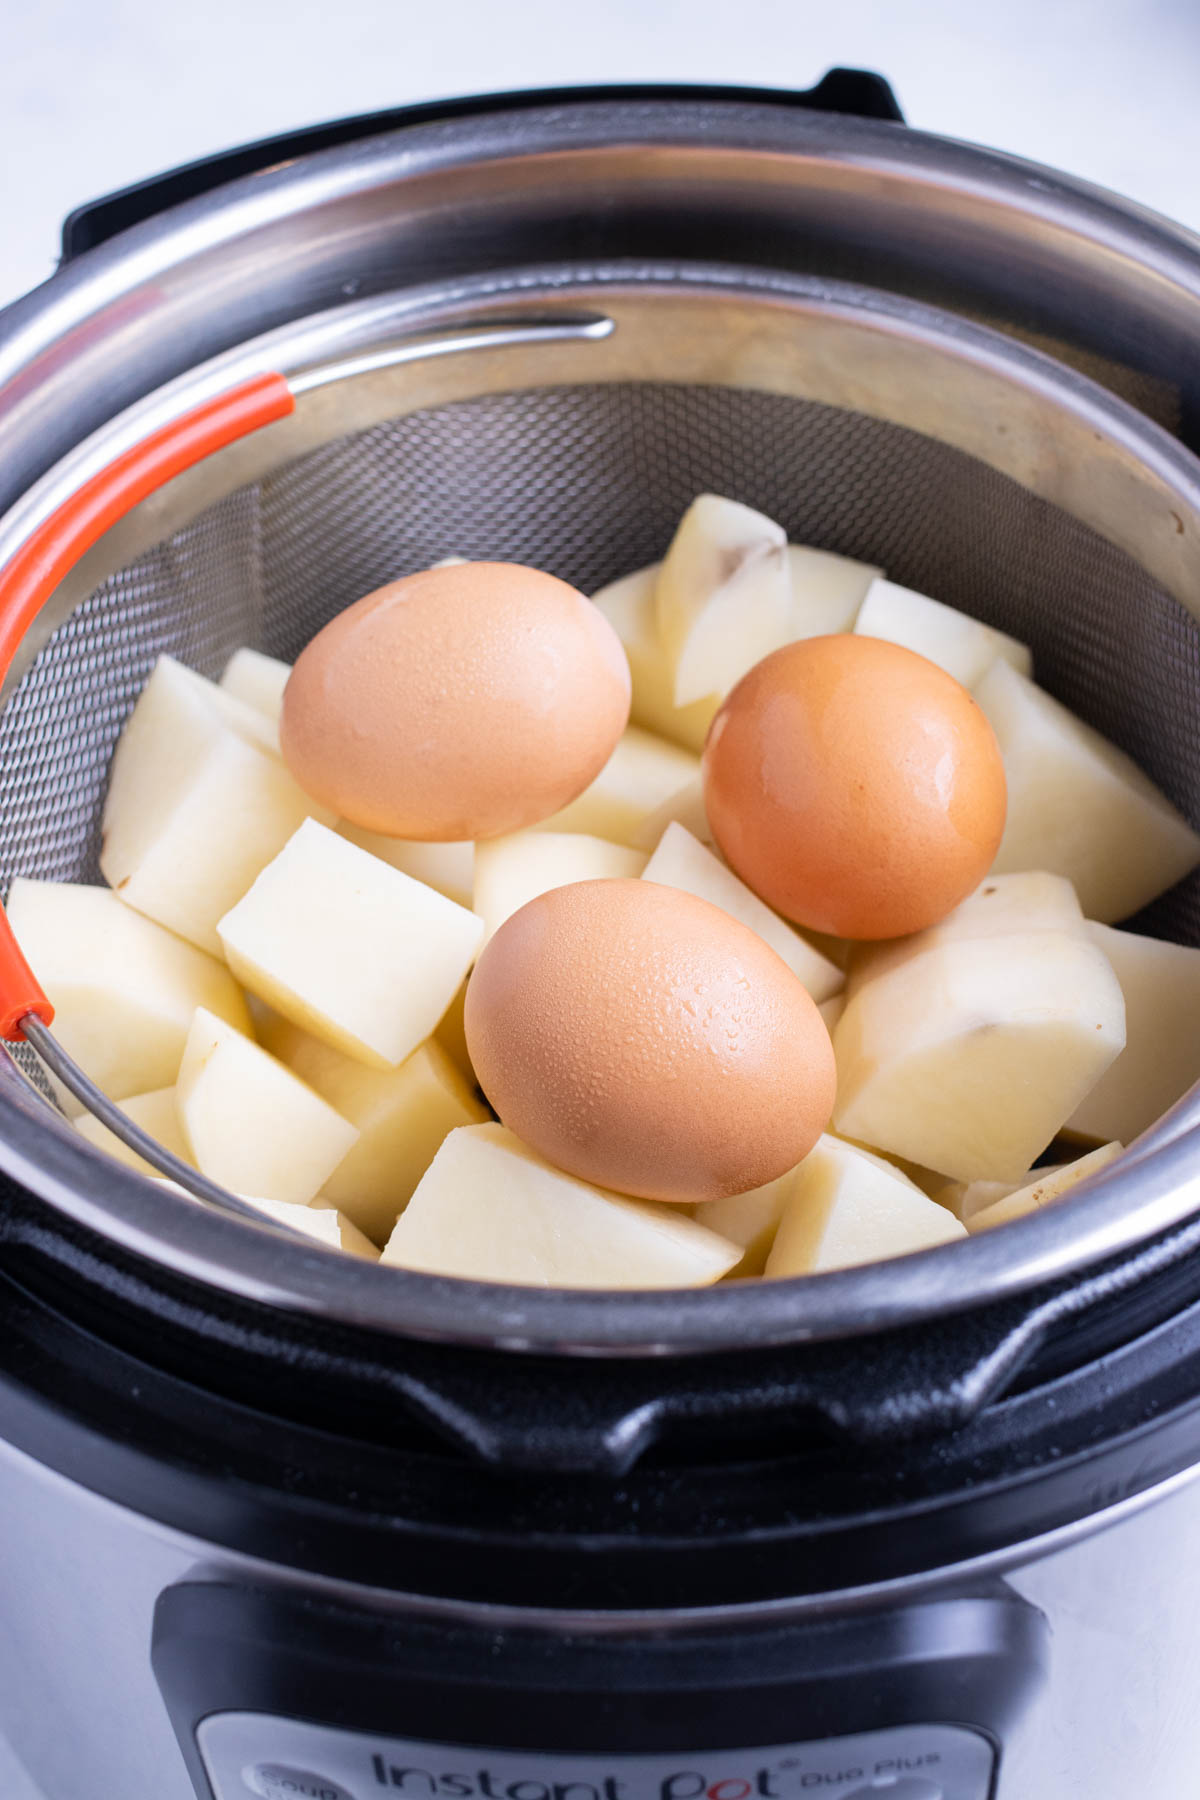 Diced potatoes and eggs are placed inside the instant pot in a vegetable basket.